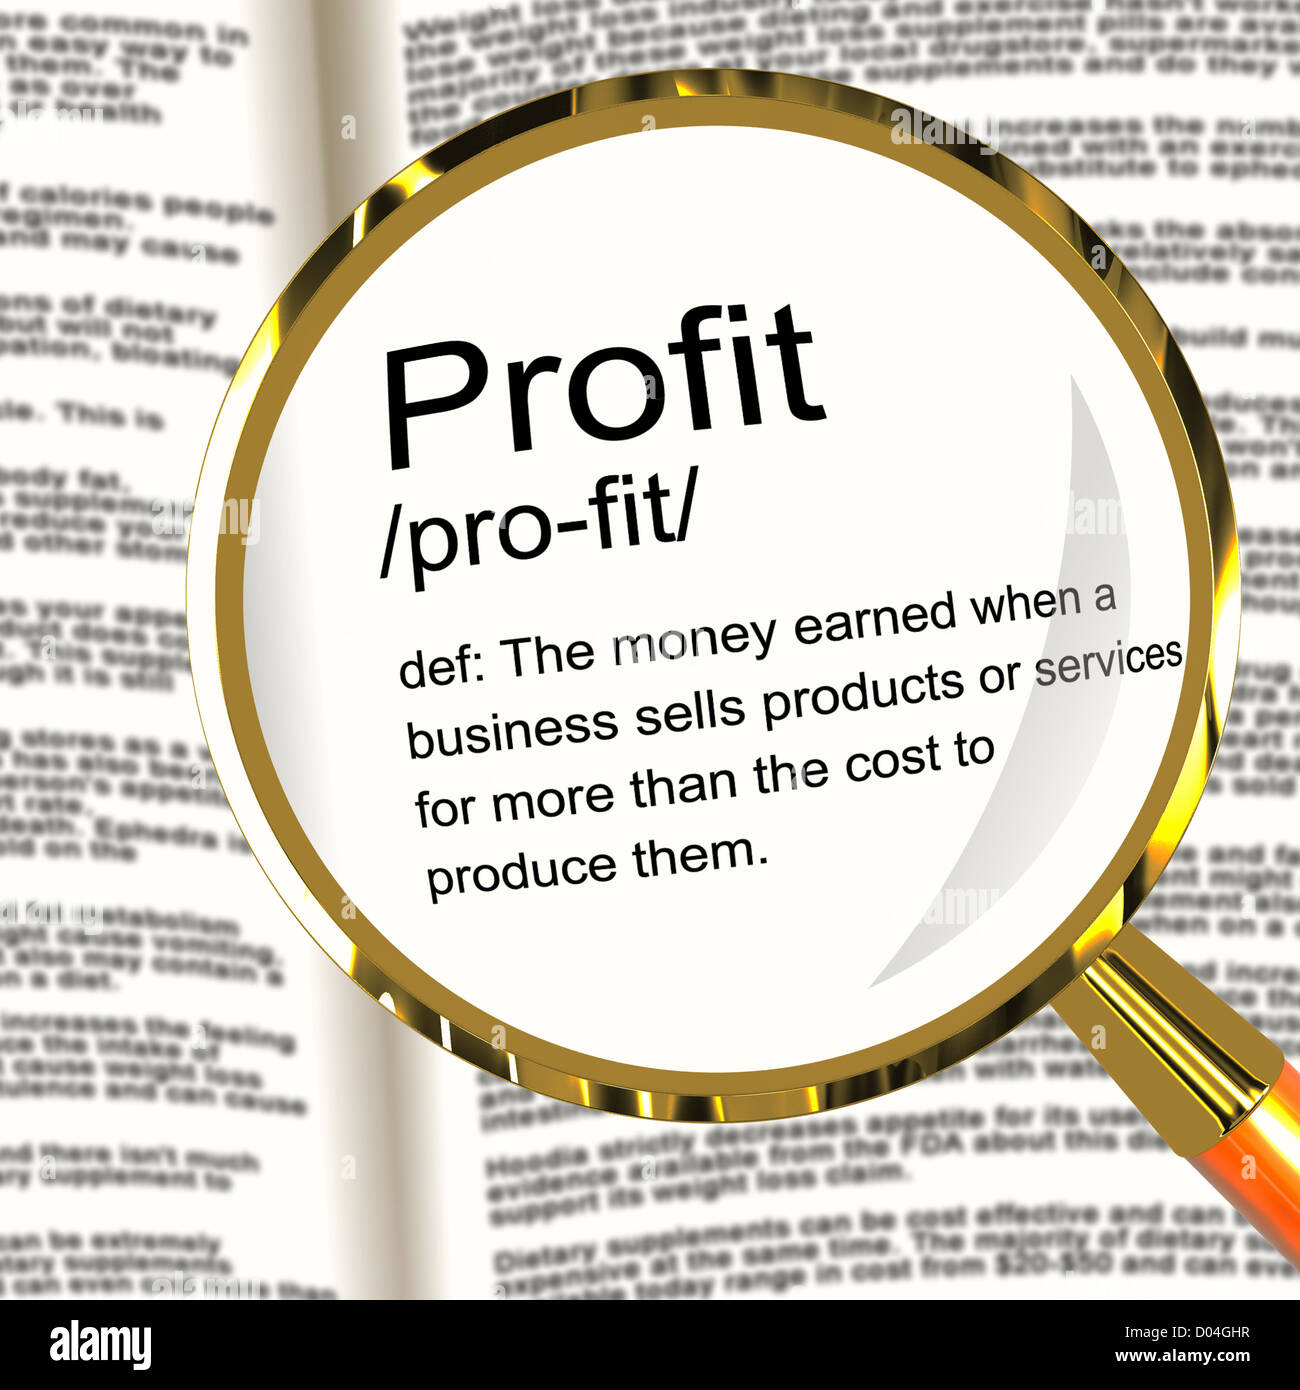 Profit Definition Magnifier Shows Income Earned From Business Stock Photo